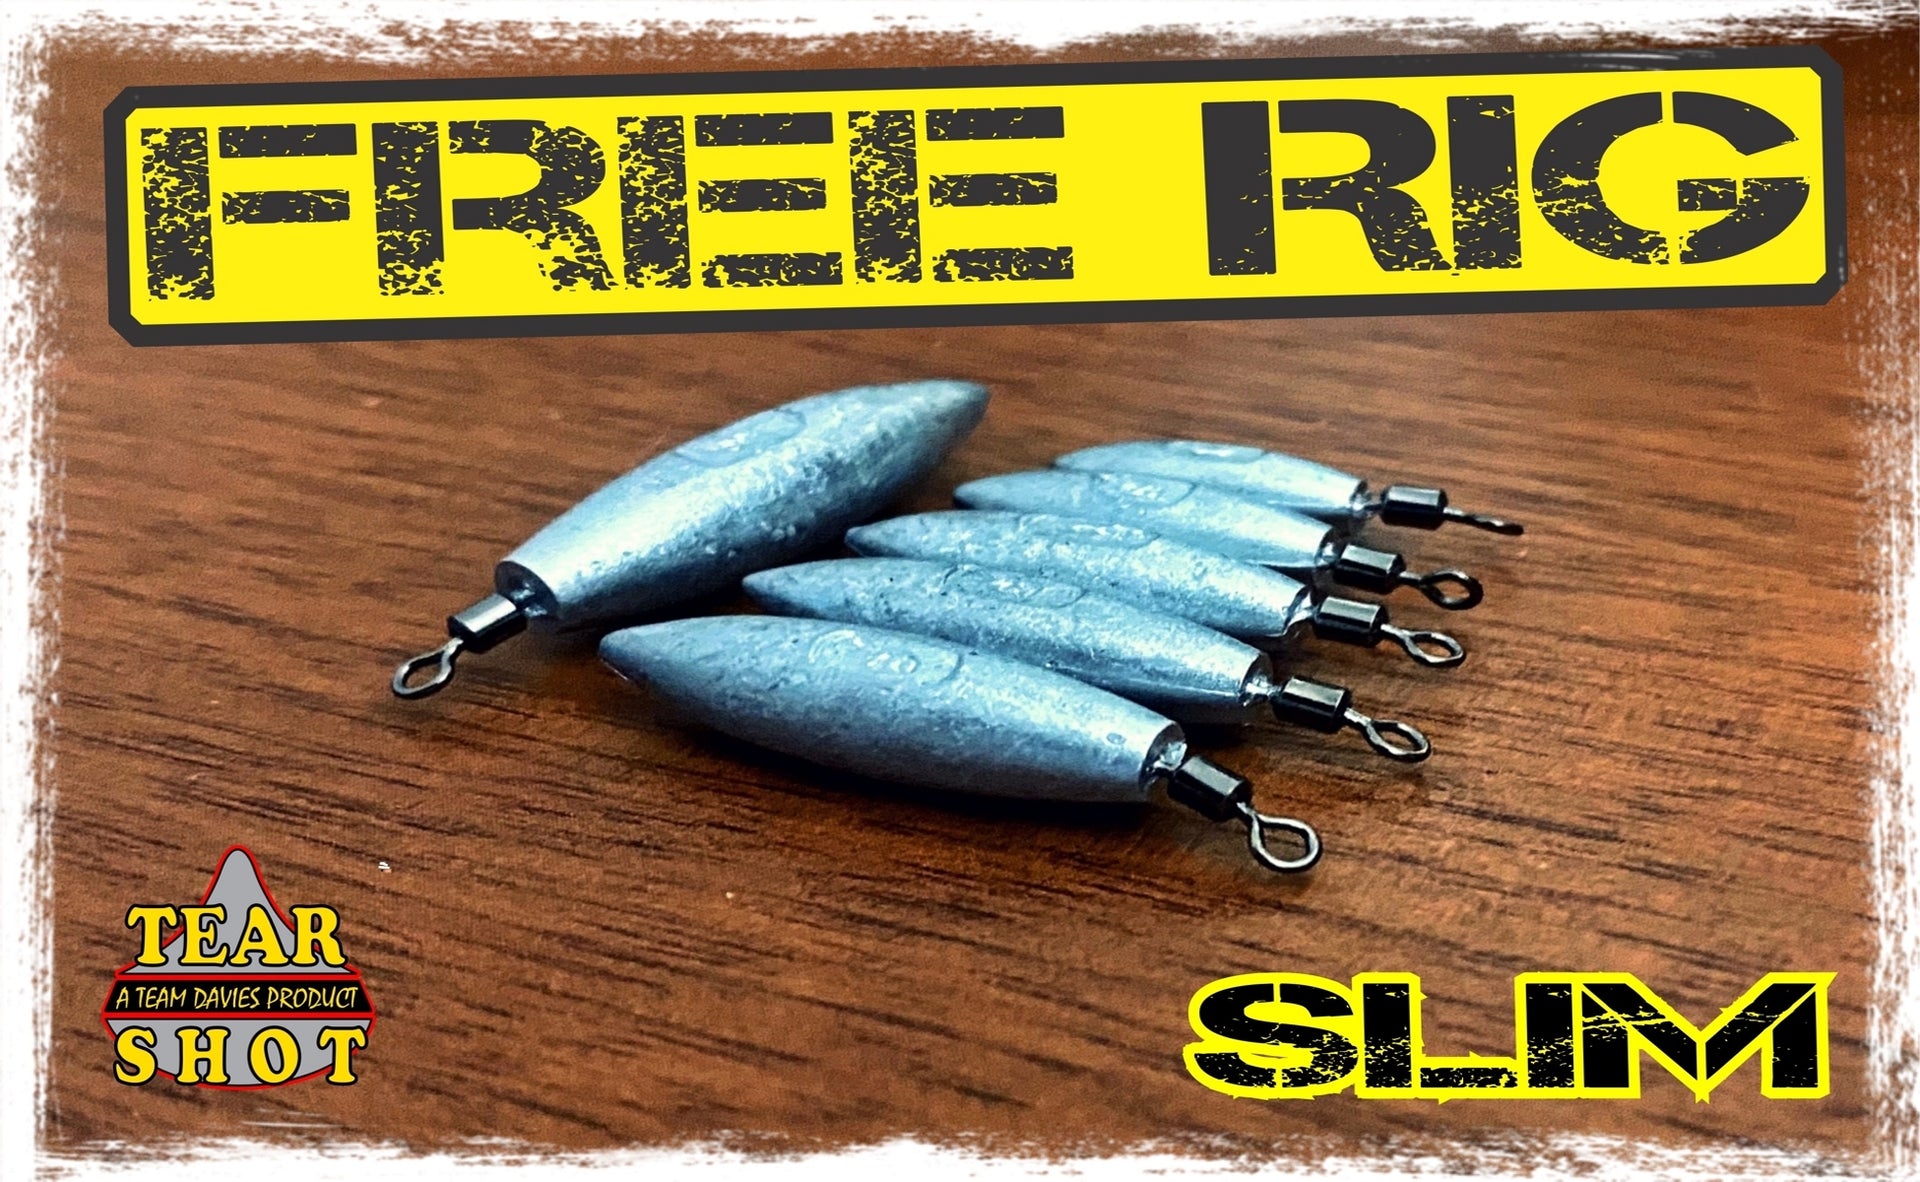 Tear Shot Slim Free Rig Weights – Tear Shot - Team Davies Tackle Company  - Tournament Quality Drop Shot Sinkers and Fishing Tackle